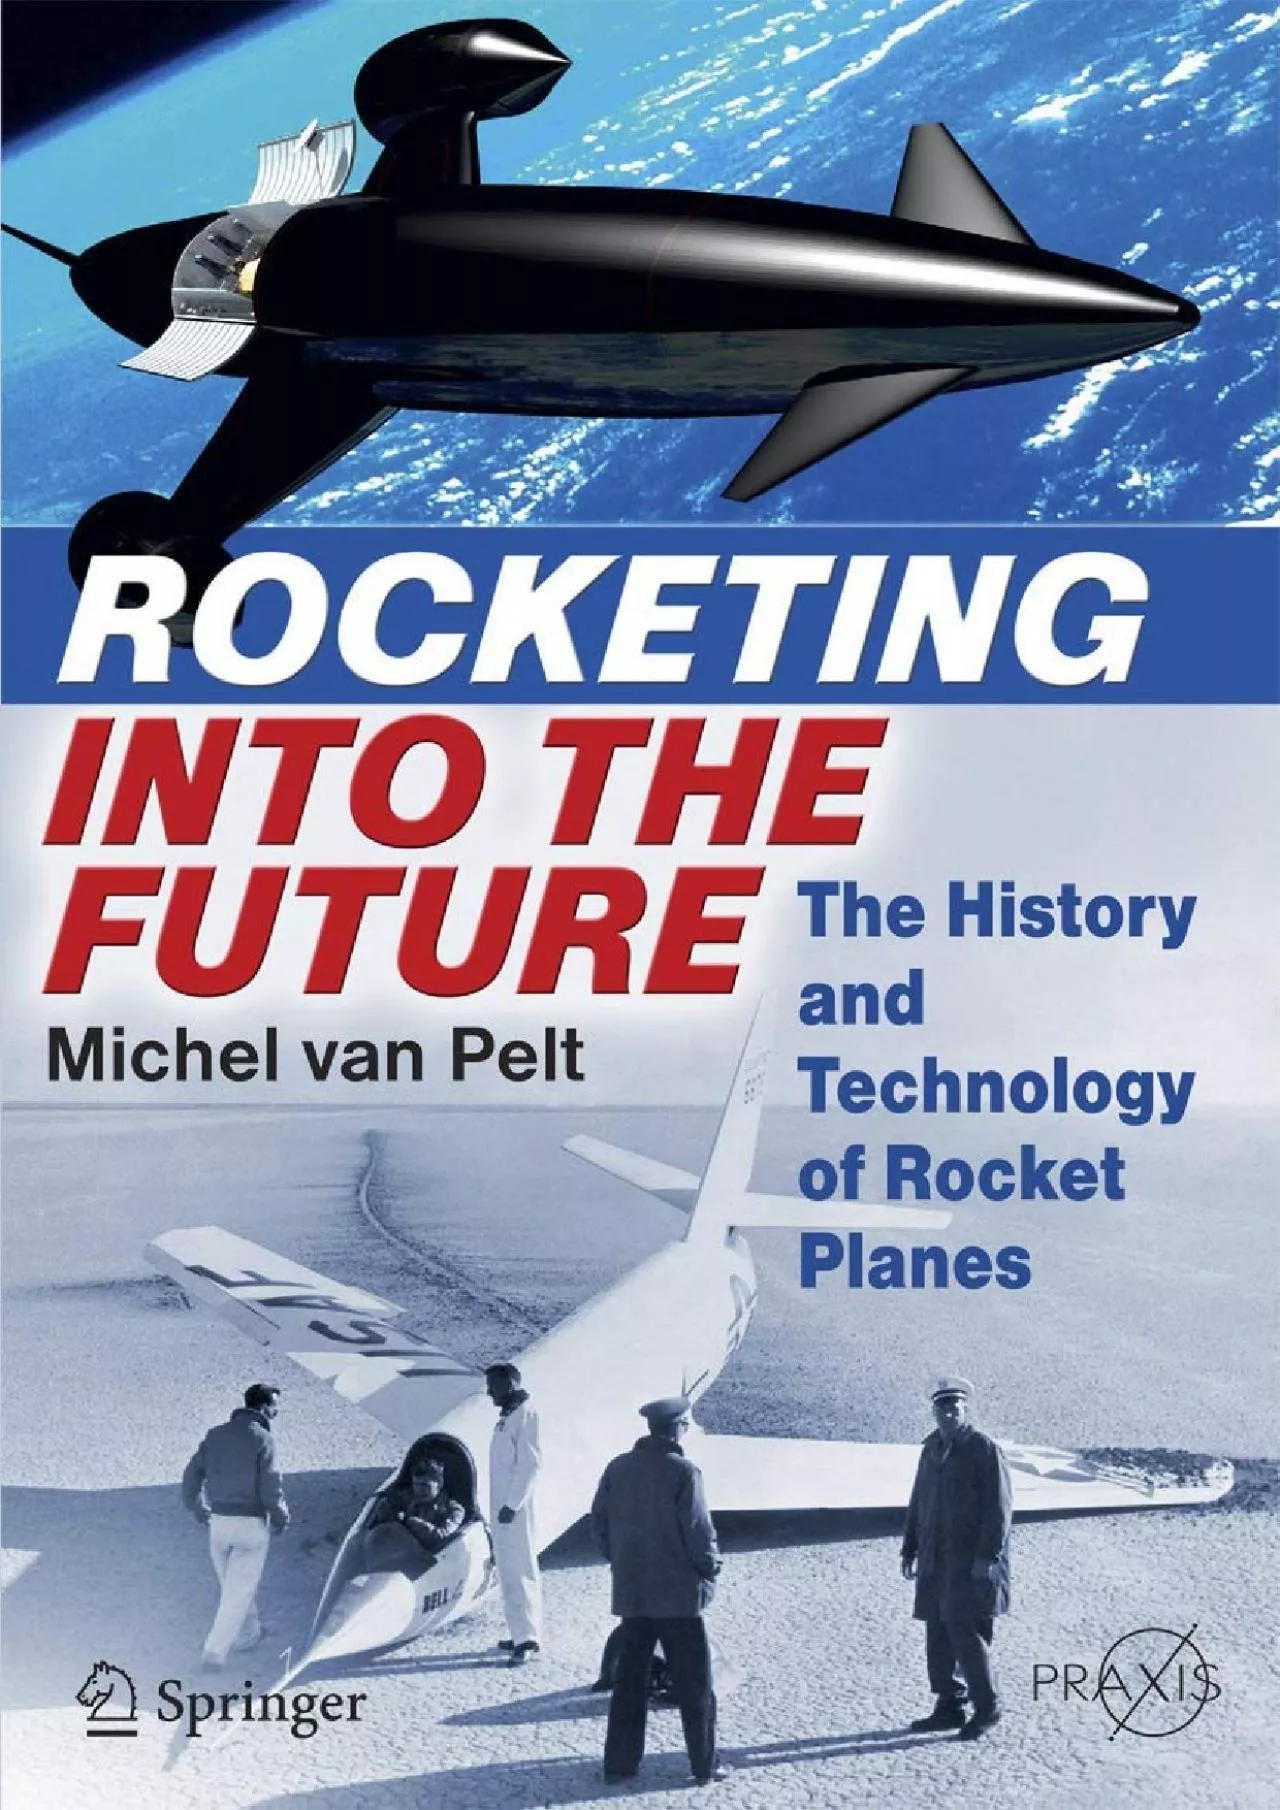 (DOWNLOAD)-Rocketing Into the Future: The History and Technology of Rocket Planes (Springer